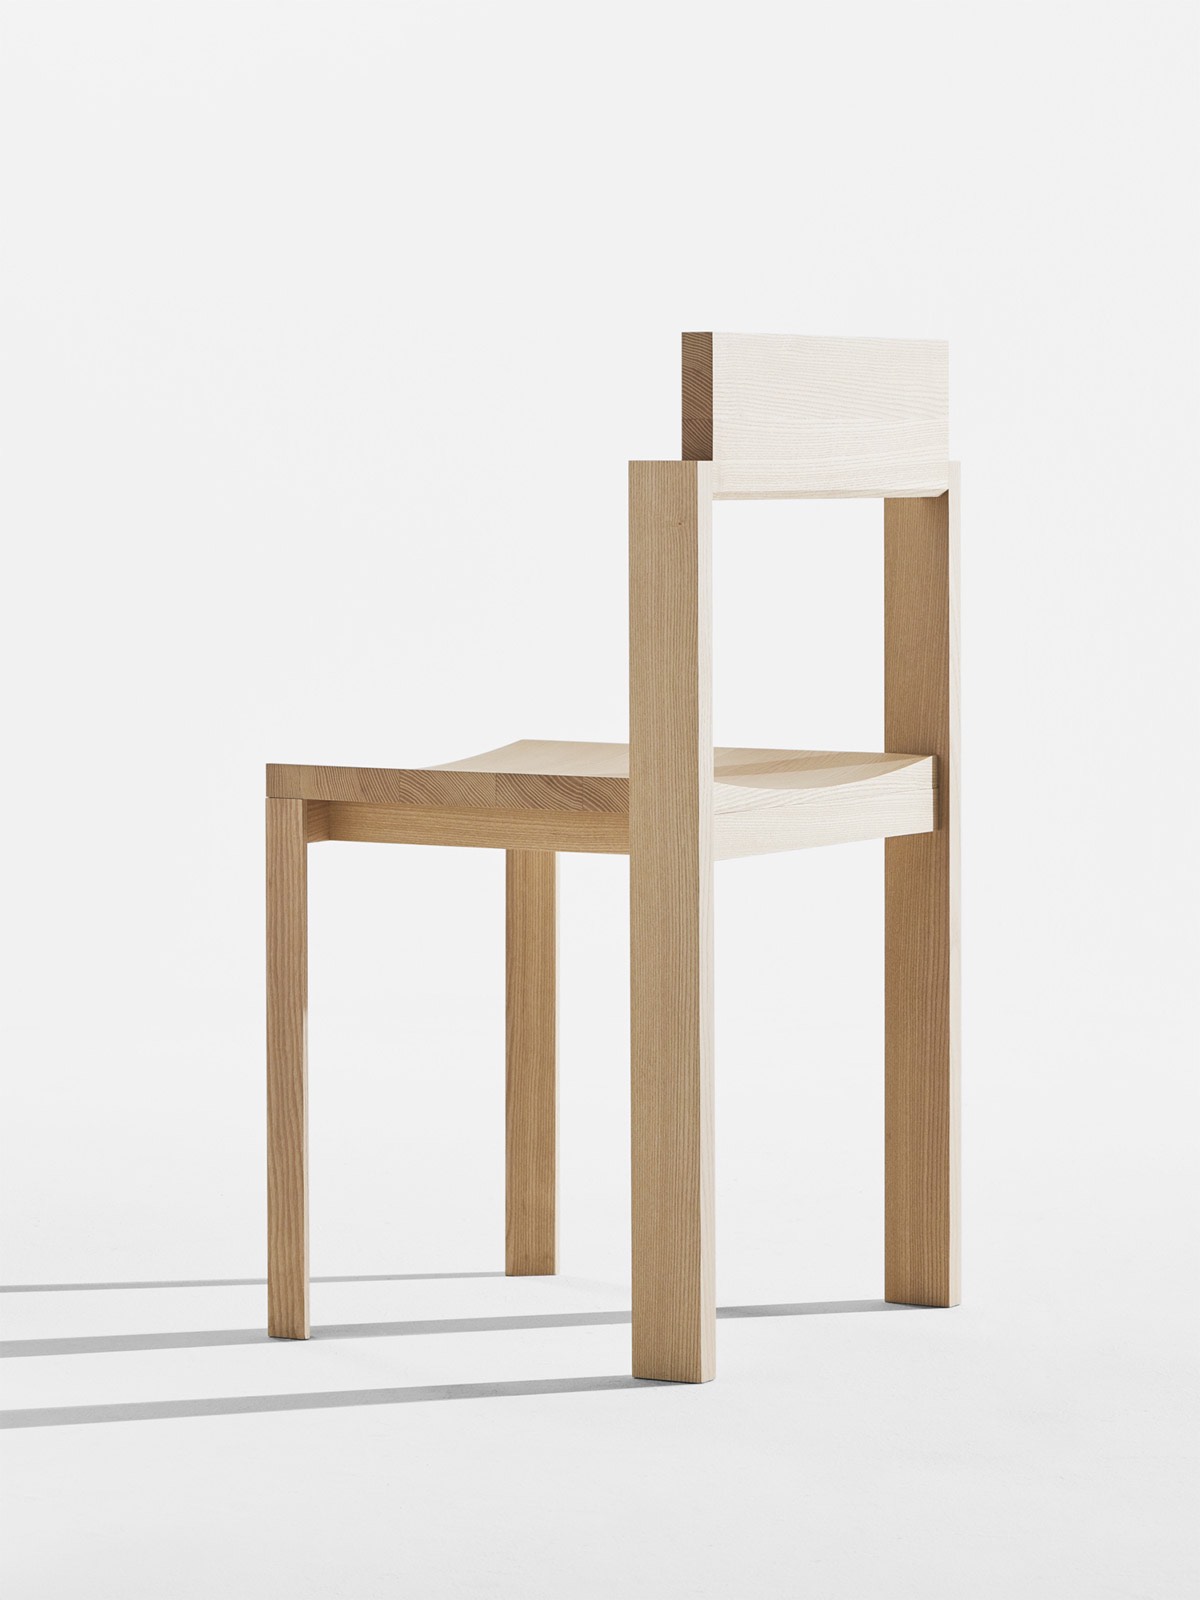 Minimalist Chair Design: Mai chair by Anthony Guex